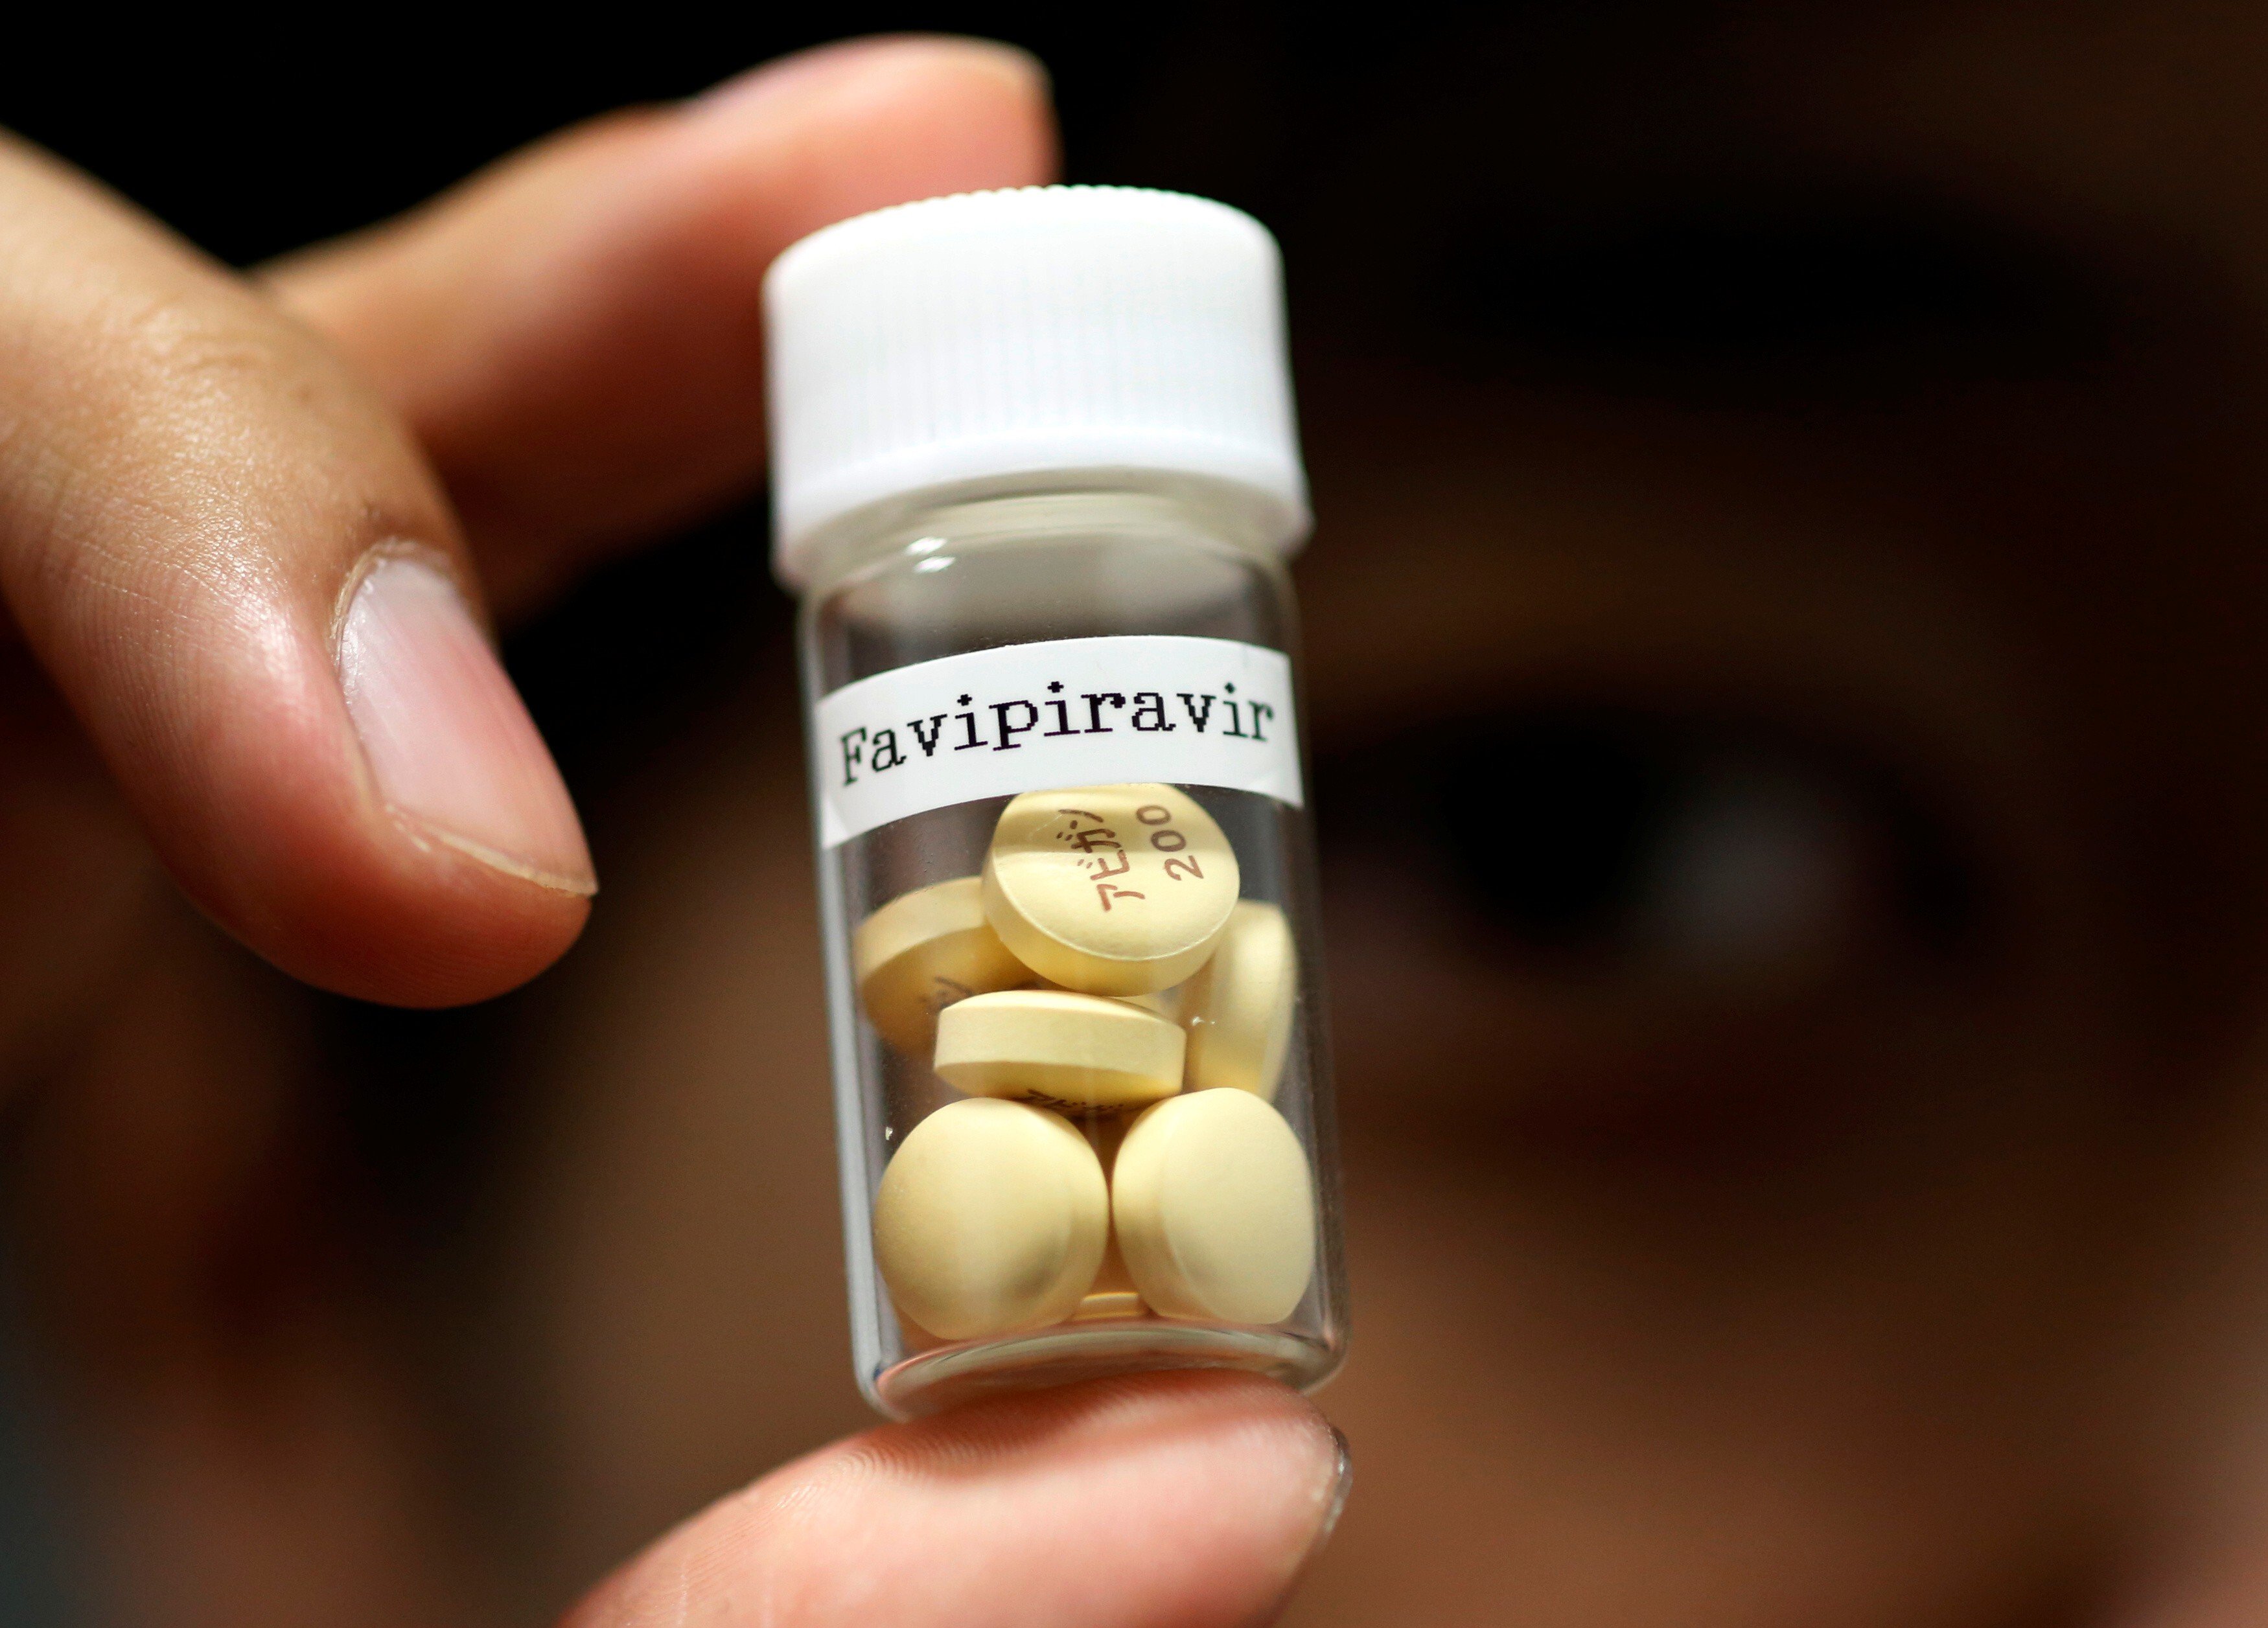 Avigan – favipiravir is the generic name – a drug approved as an anti-influenza drug in Japan and developed by drug maker Toyama Chemical Co, a subsidiary of Fujifilm Holdings Co. Photo: Reuters